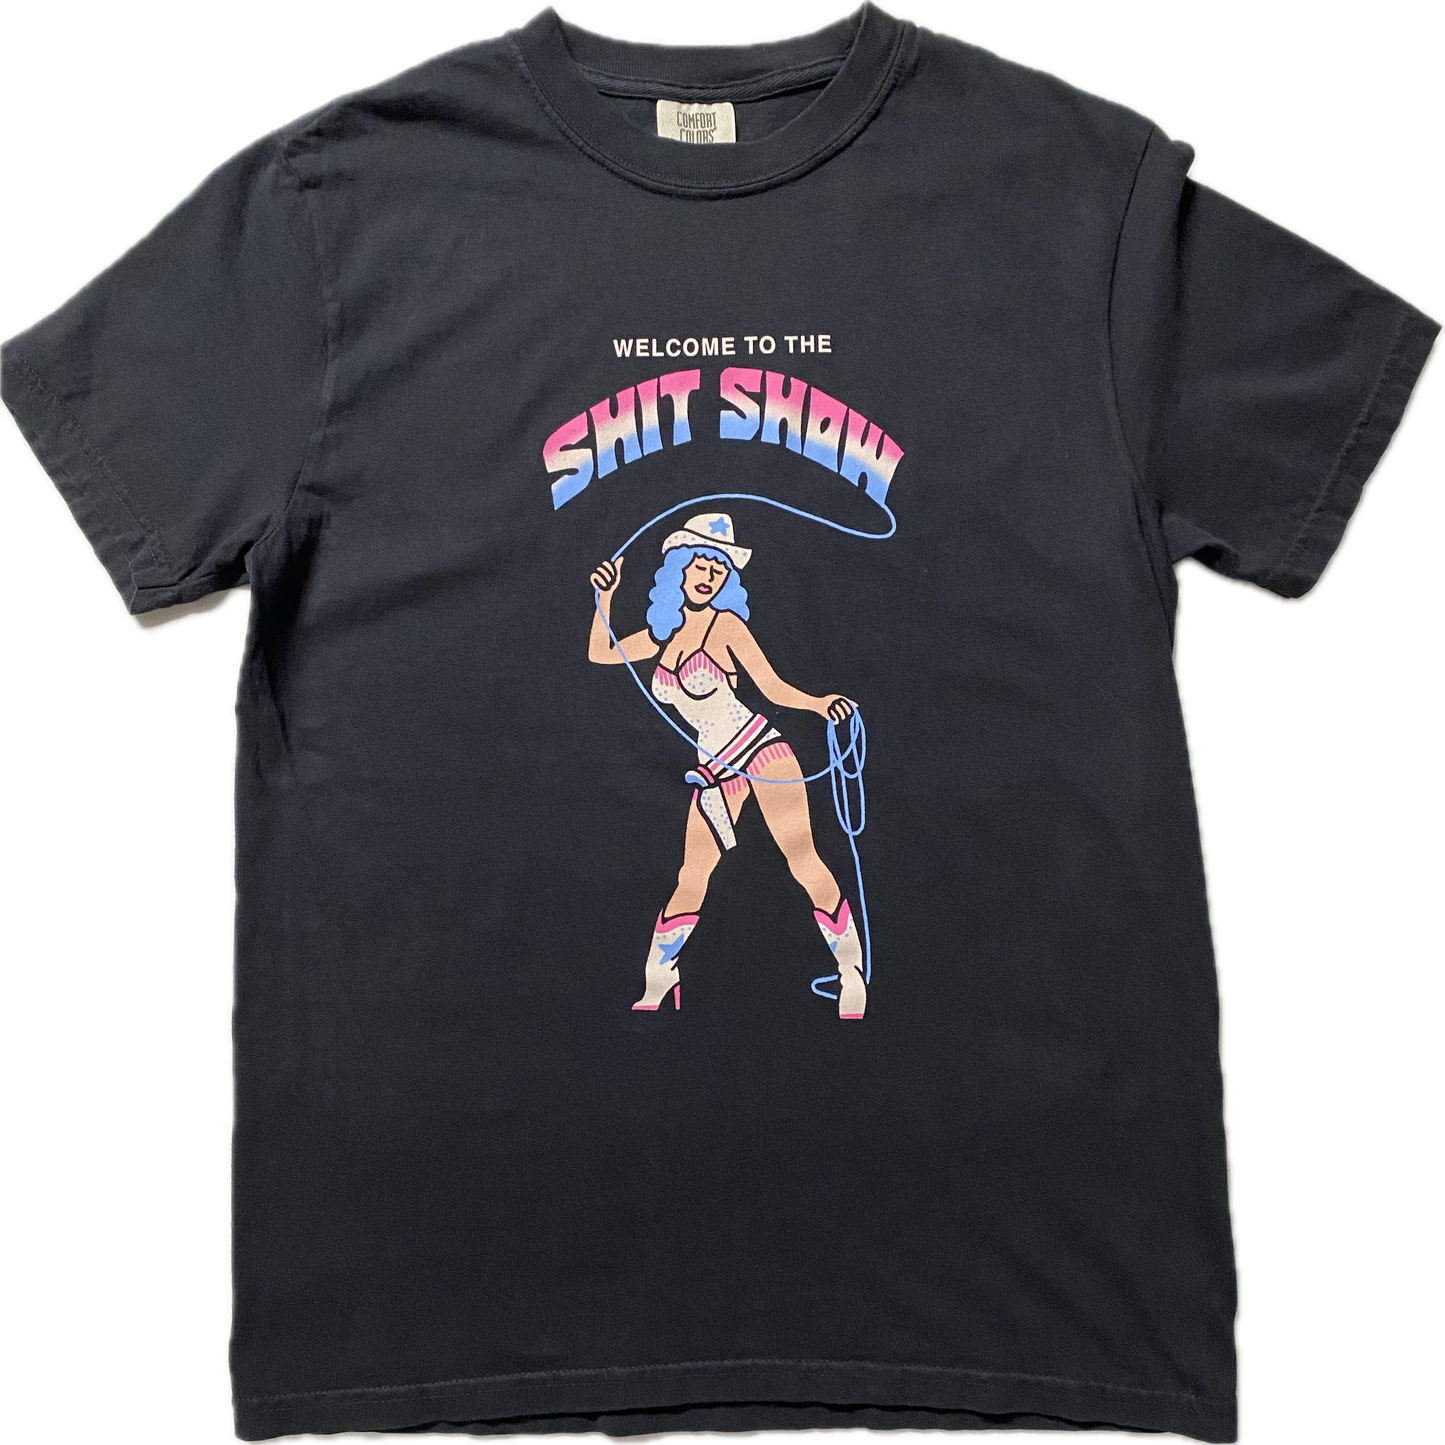 A black short sleeve t-shirt that reads Welcome to the Shit Show. The last 2 words are in a large font in rainbow colors of light blue, white and pink. Below the words is a cowgirl with blue hair in a white bathing suit and white boots. She is holding a blue lasso and have a holster with a pistol.